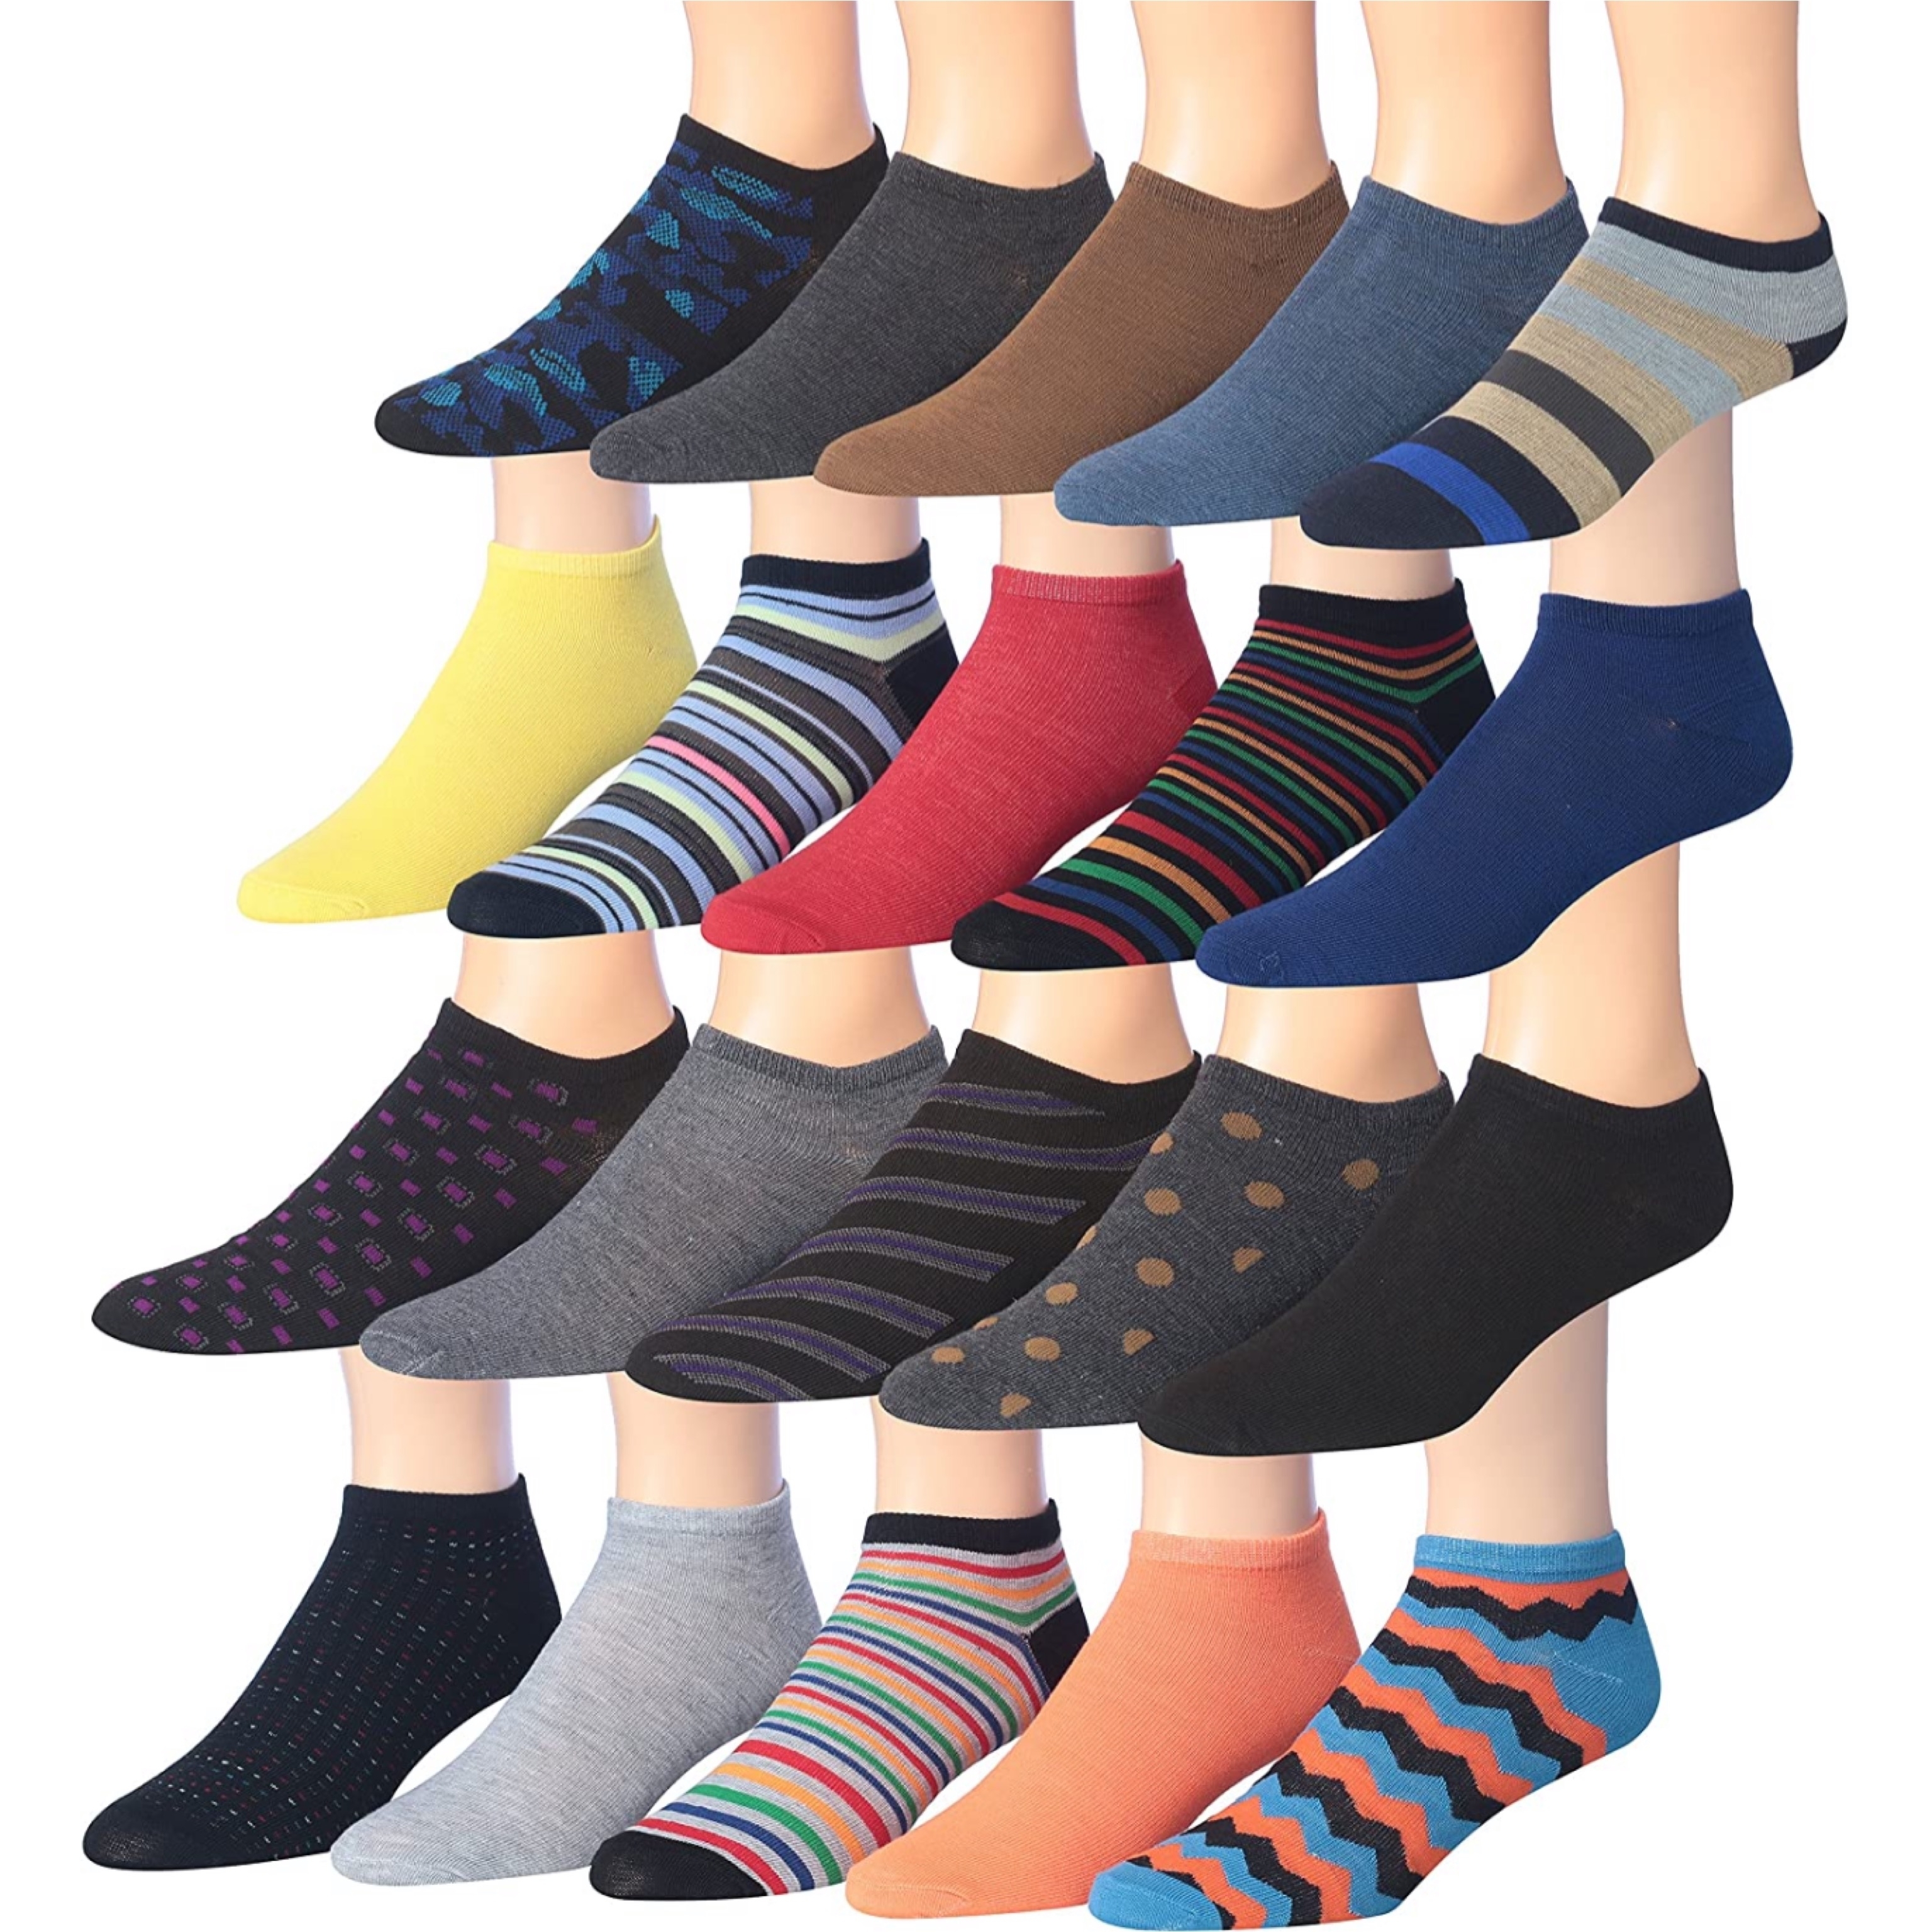 30 Pairs: James Fiallo Men's Classy Extra Lightweight Colorful Patterned Low Cut/No Show Socks